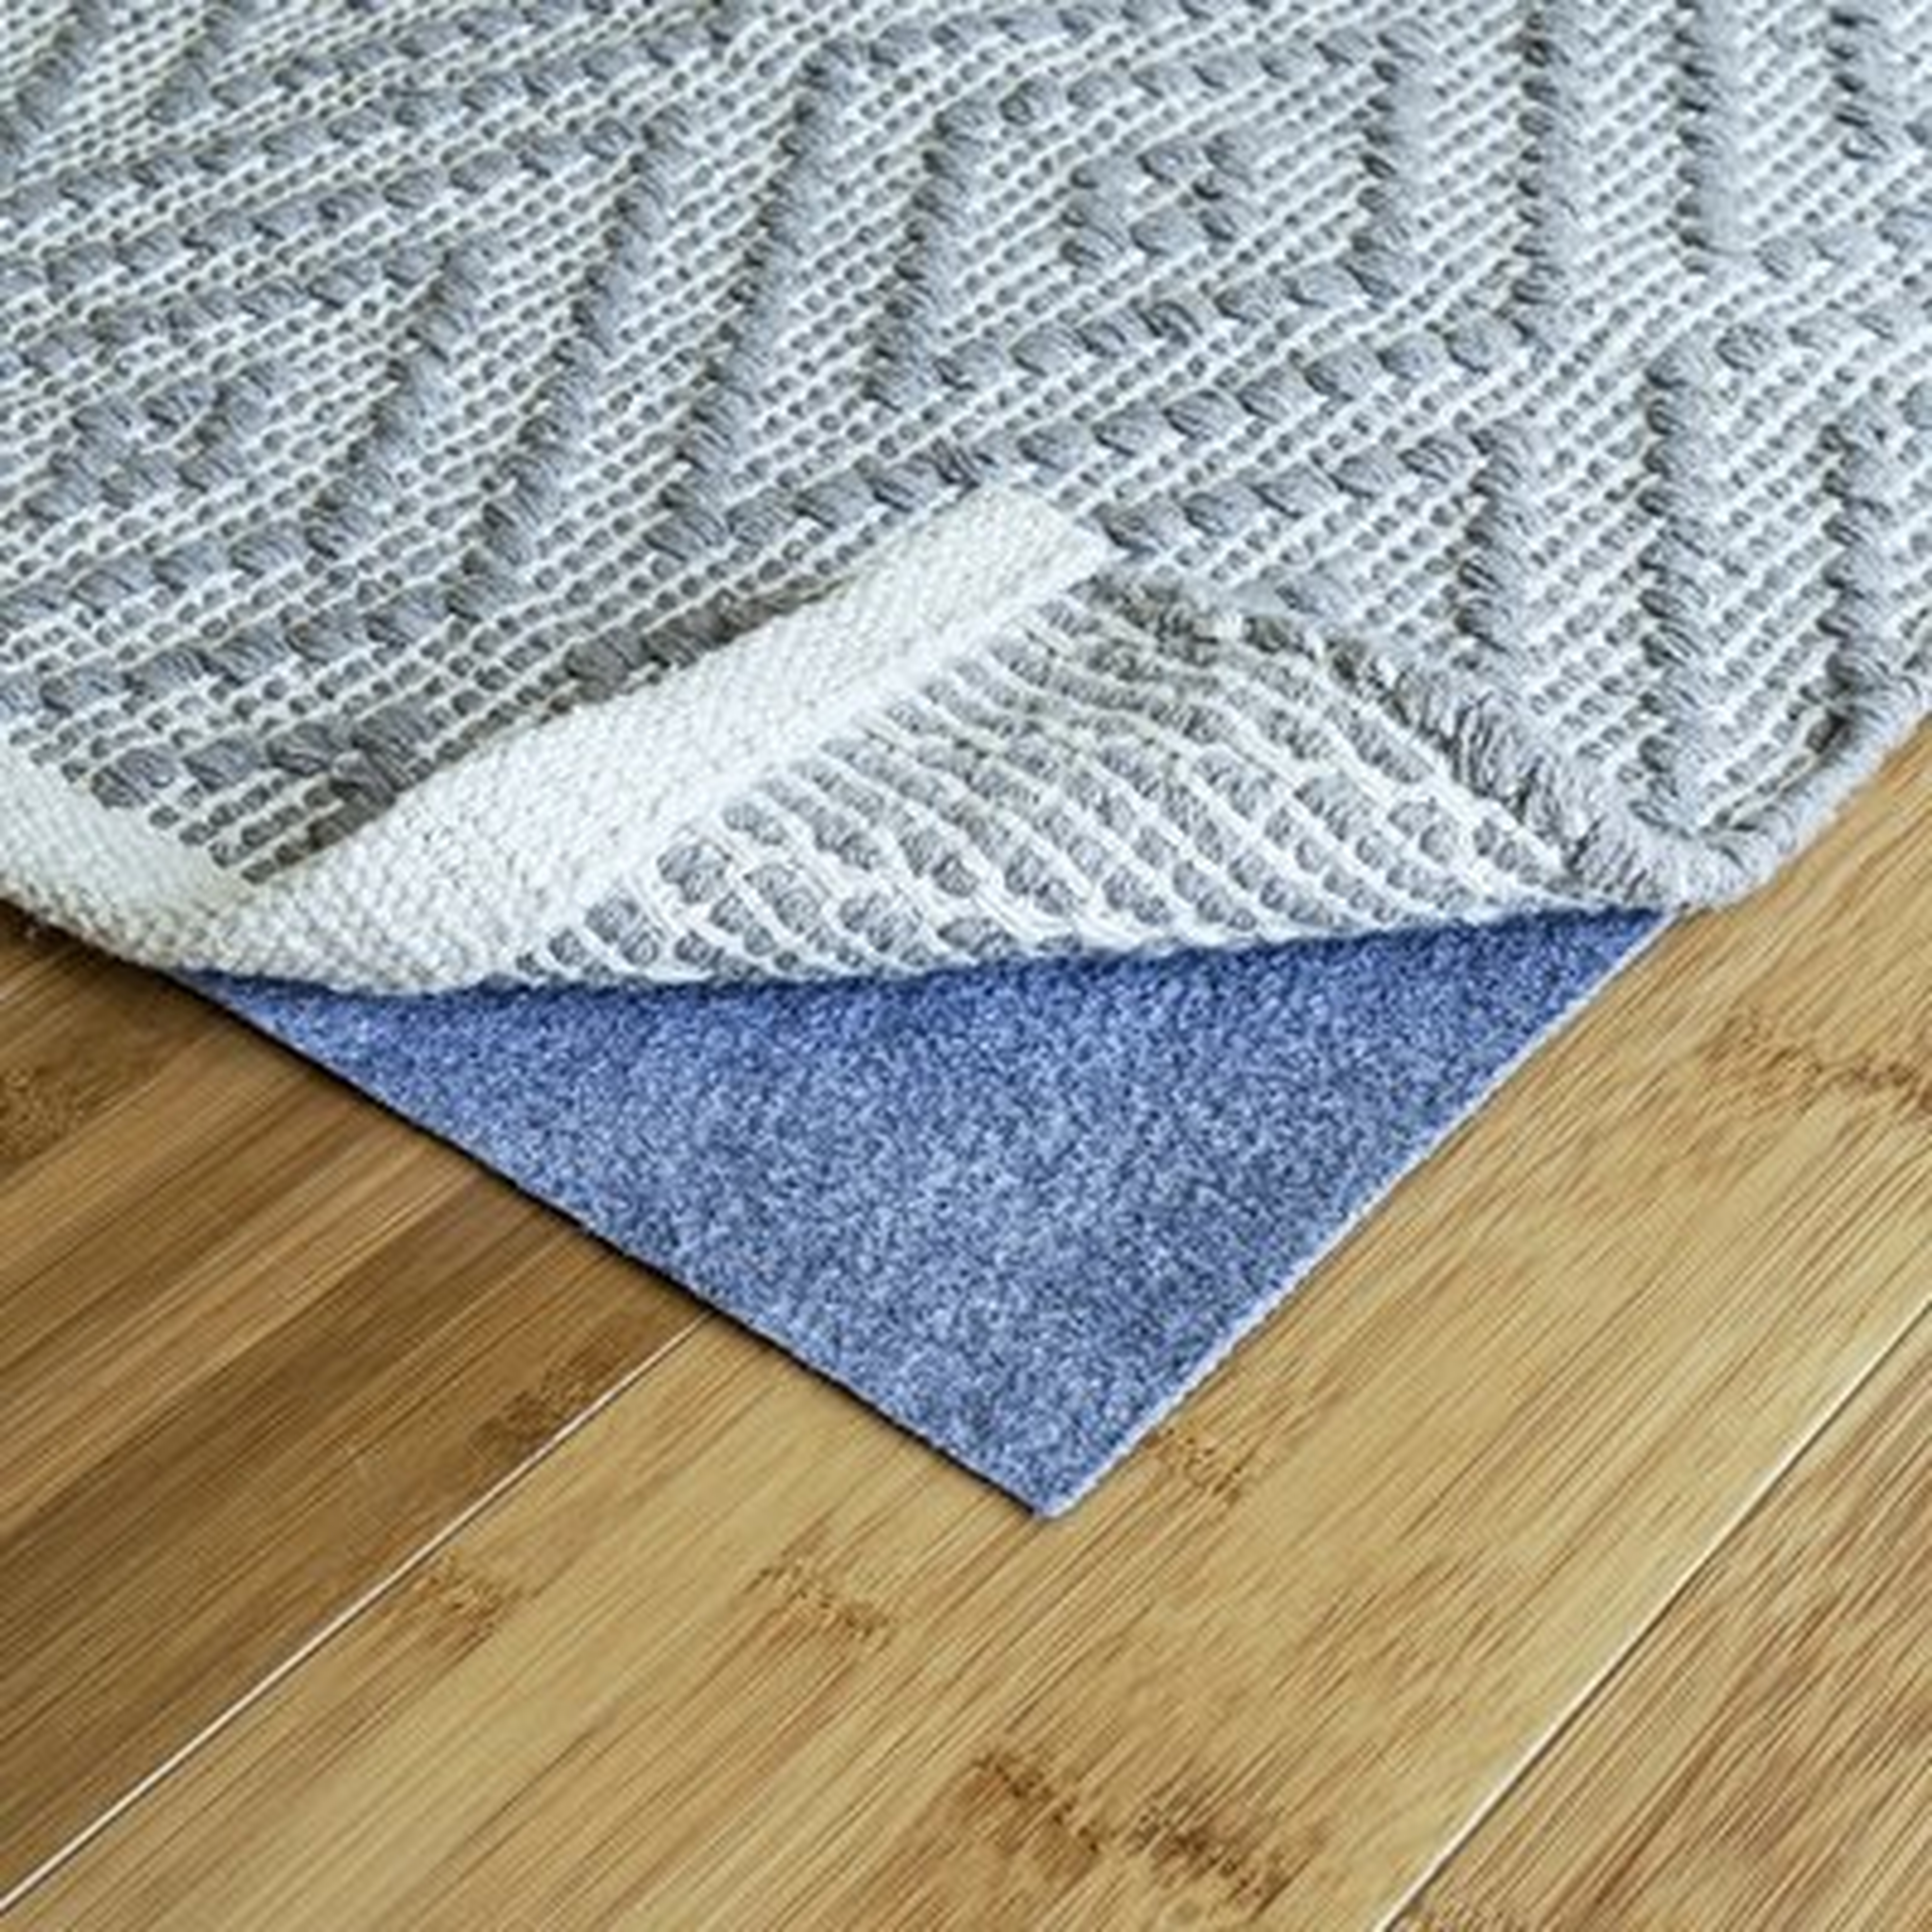 Rug Pro Ultra-Low Profile Felt and Rubber Rug Pad - Wayfair